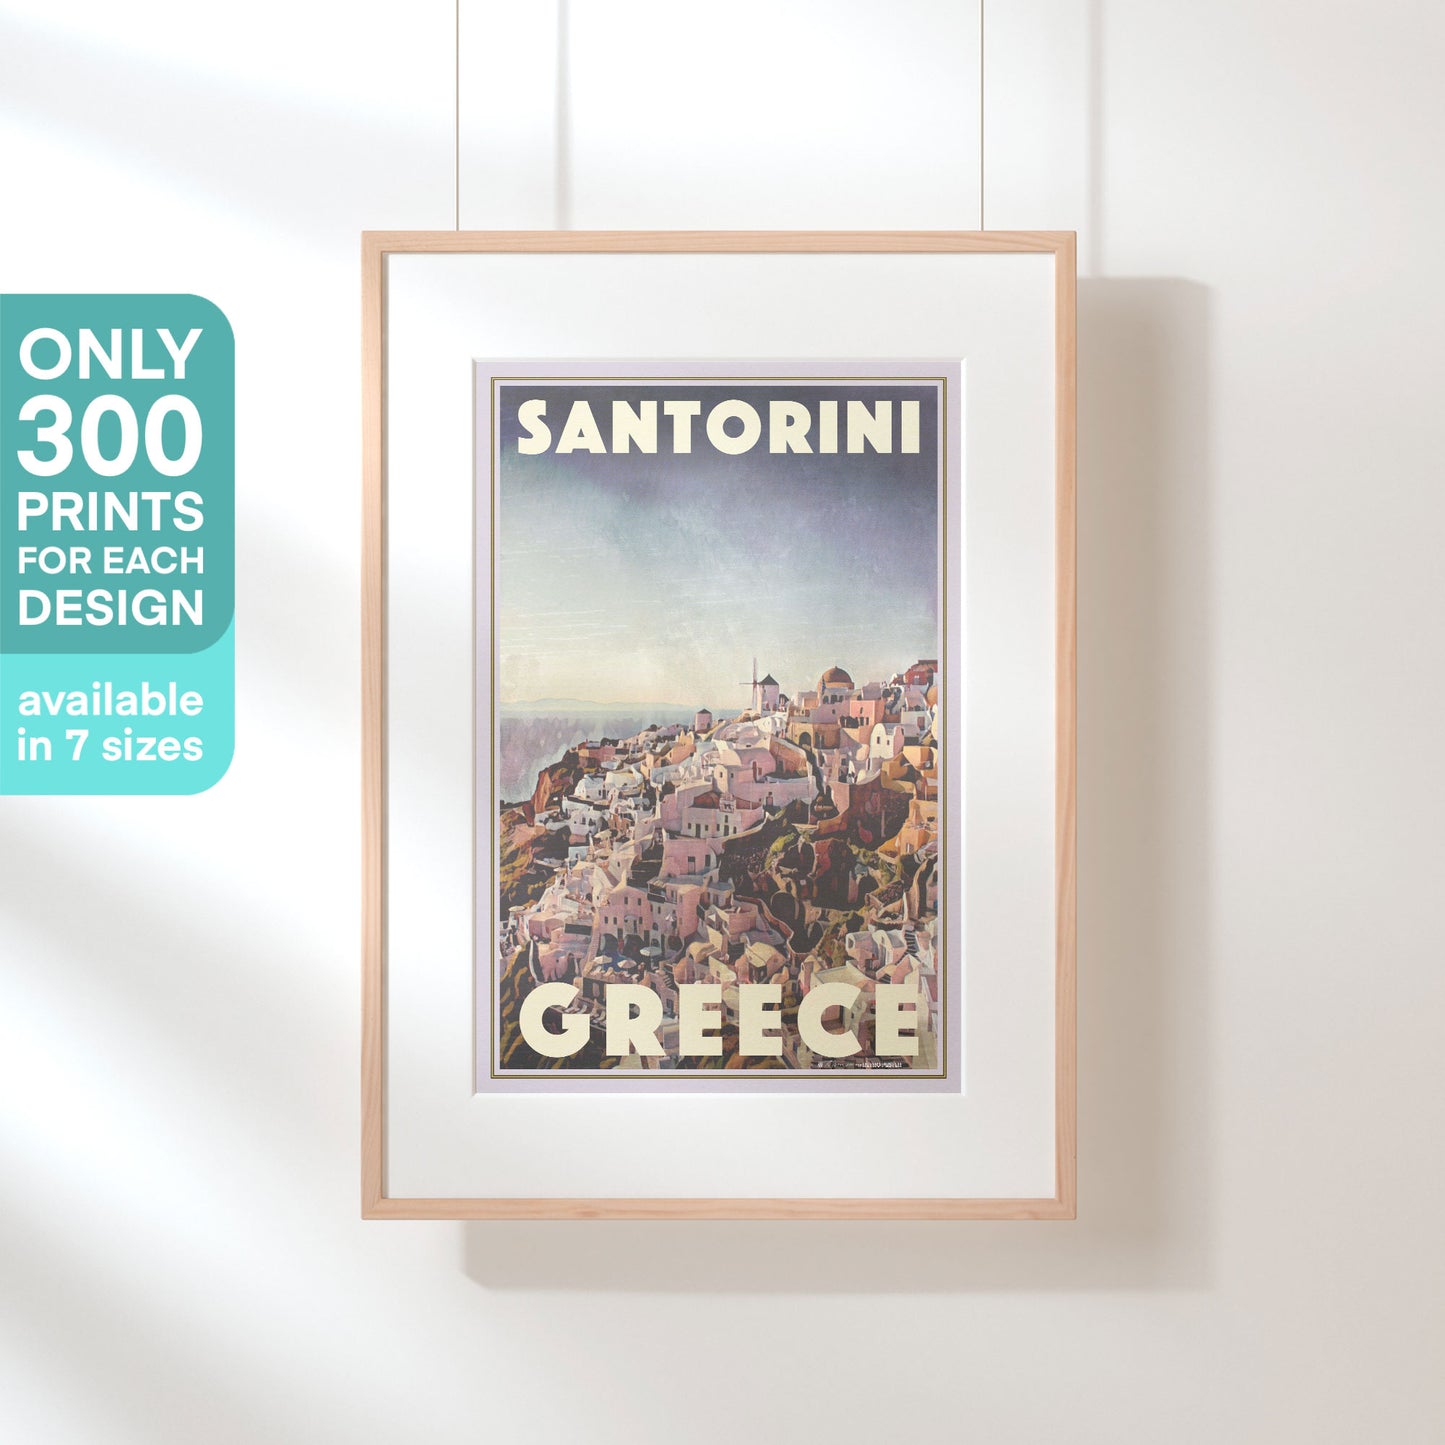 Limited Edition Santorini Travel Poster | Panorama by Alecse